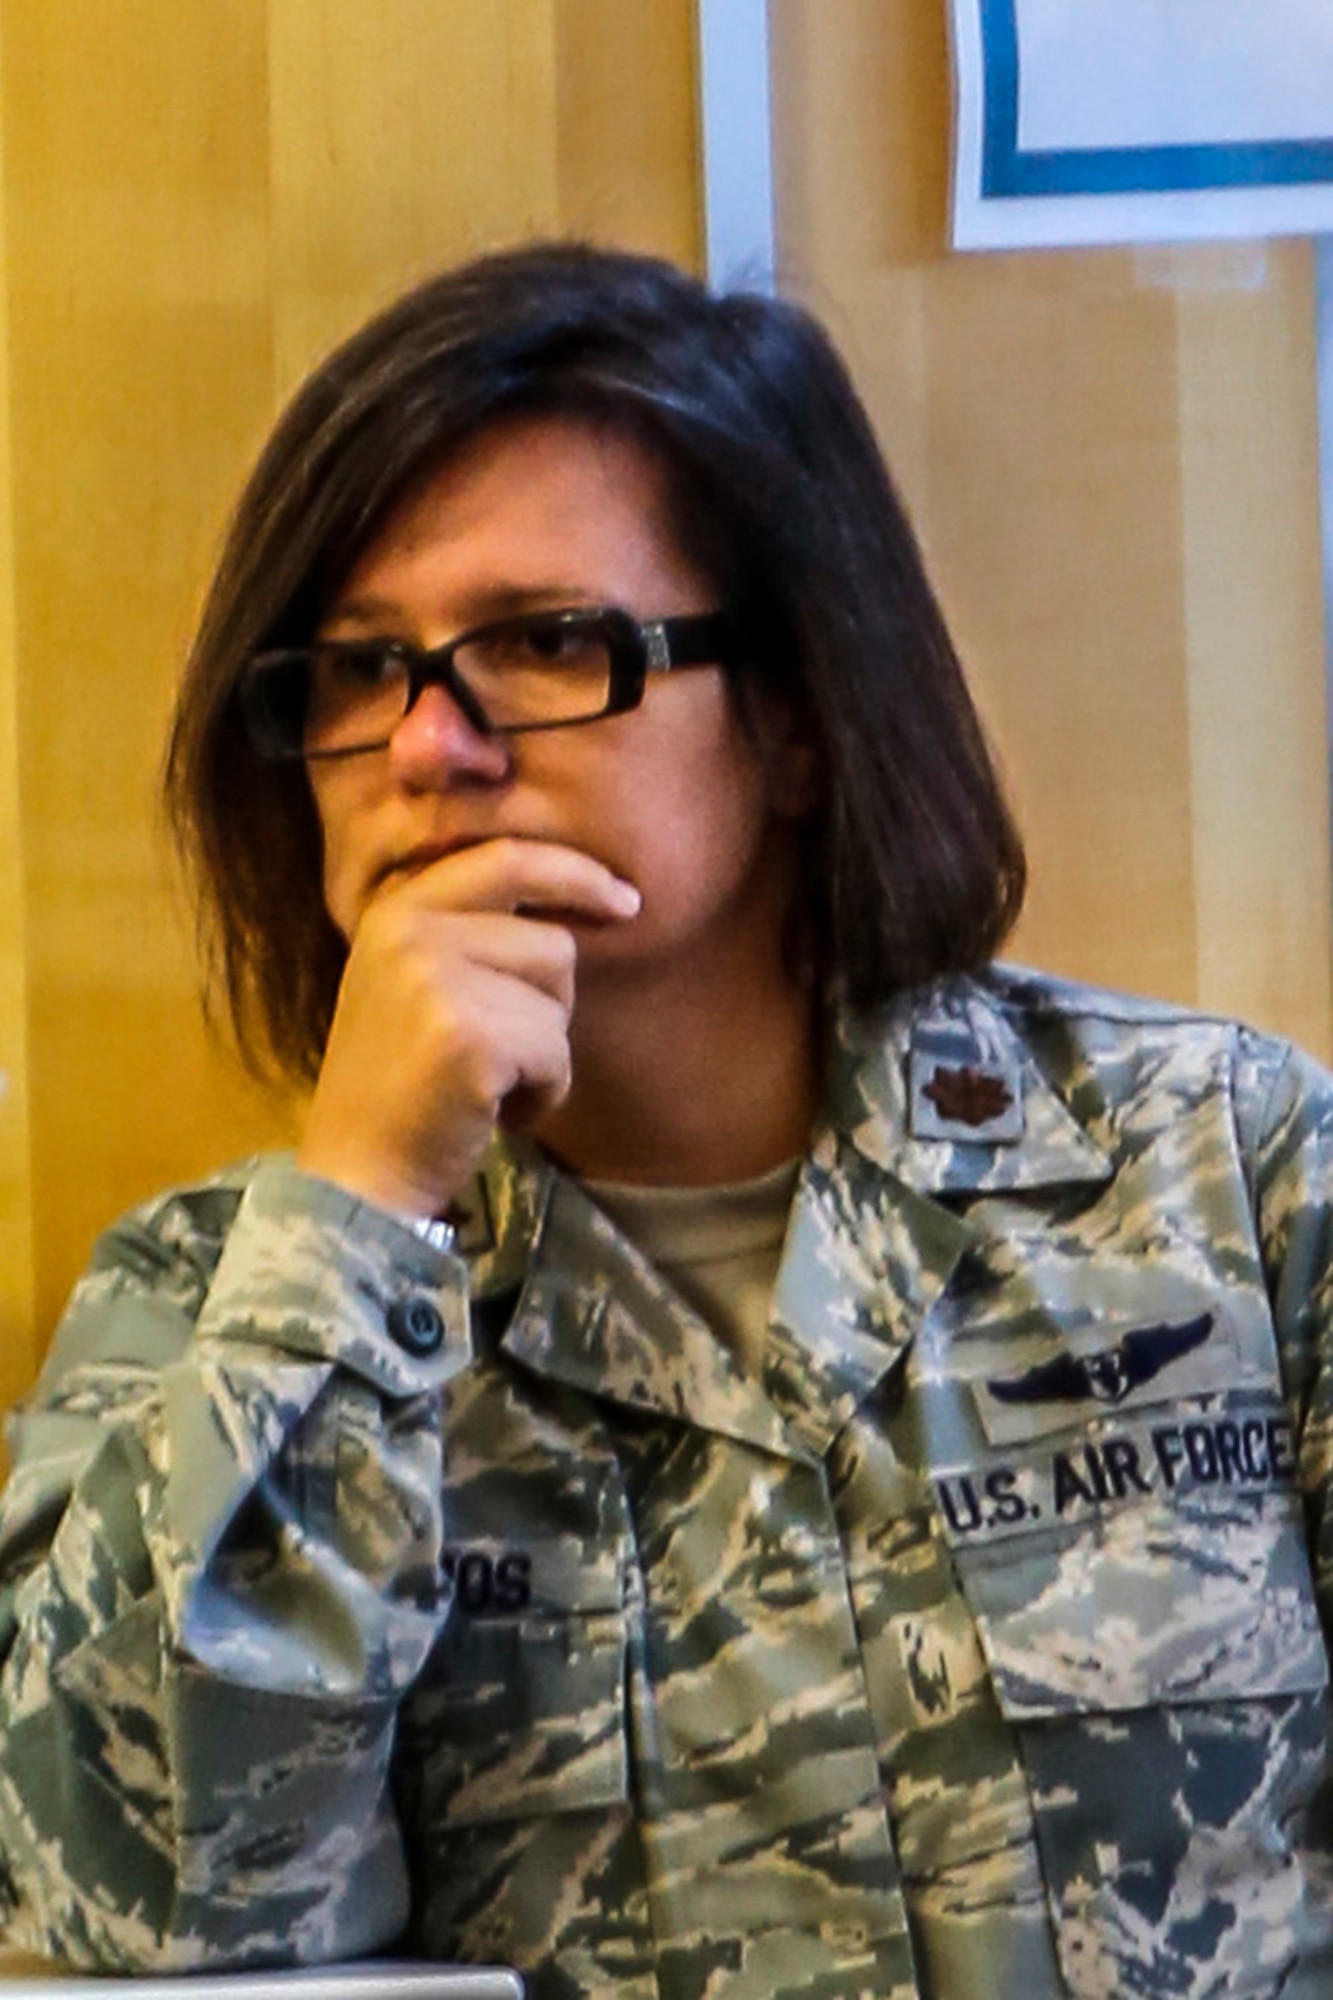 Maj. Anniesa Selimos, 446th Aerospace Medicine Squadron chief of Nursing at McChord Field, Wash., listens to a medical emergency scenario during a mass casualty tabletop exercise. Selimos joined the Air Force Reserve, after being inspired by her brother's enlistment. (U.S. Air Force Reserve photo by Master Sgt. Jake Chappelle)